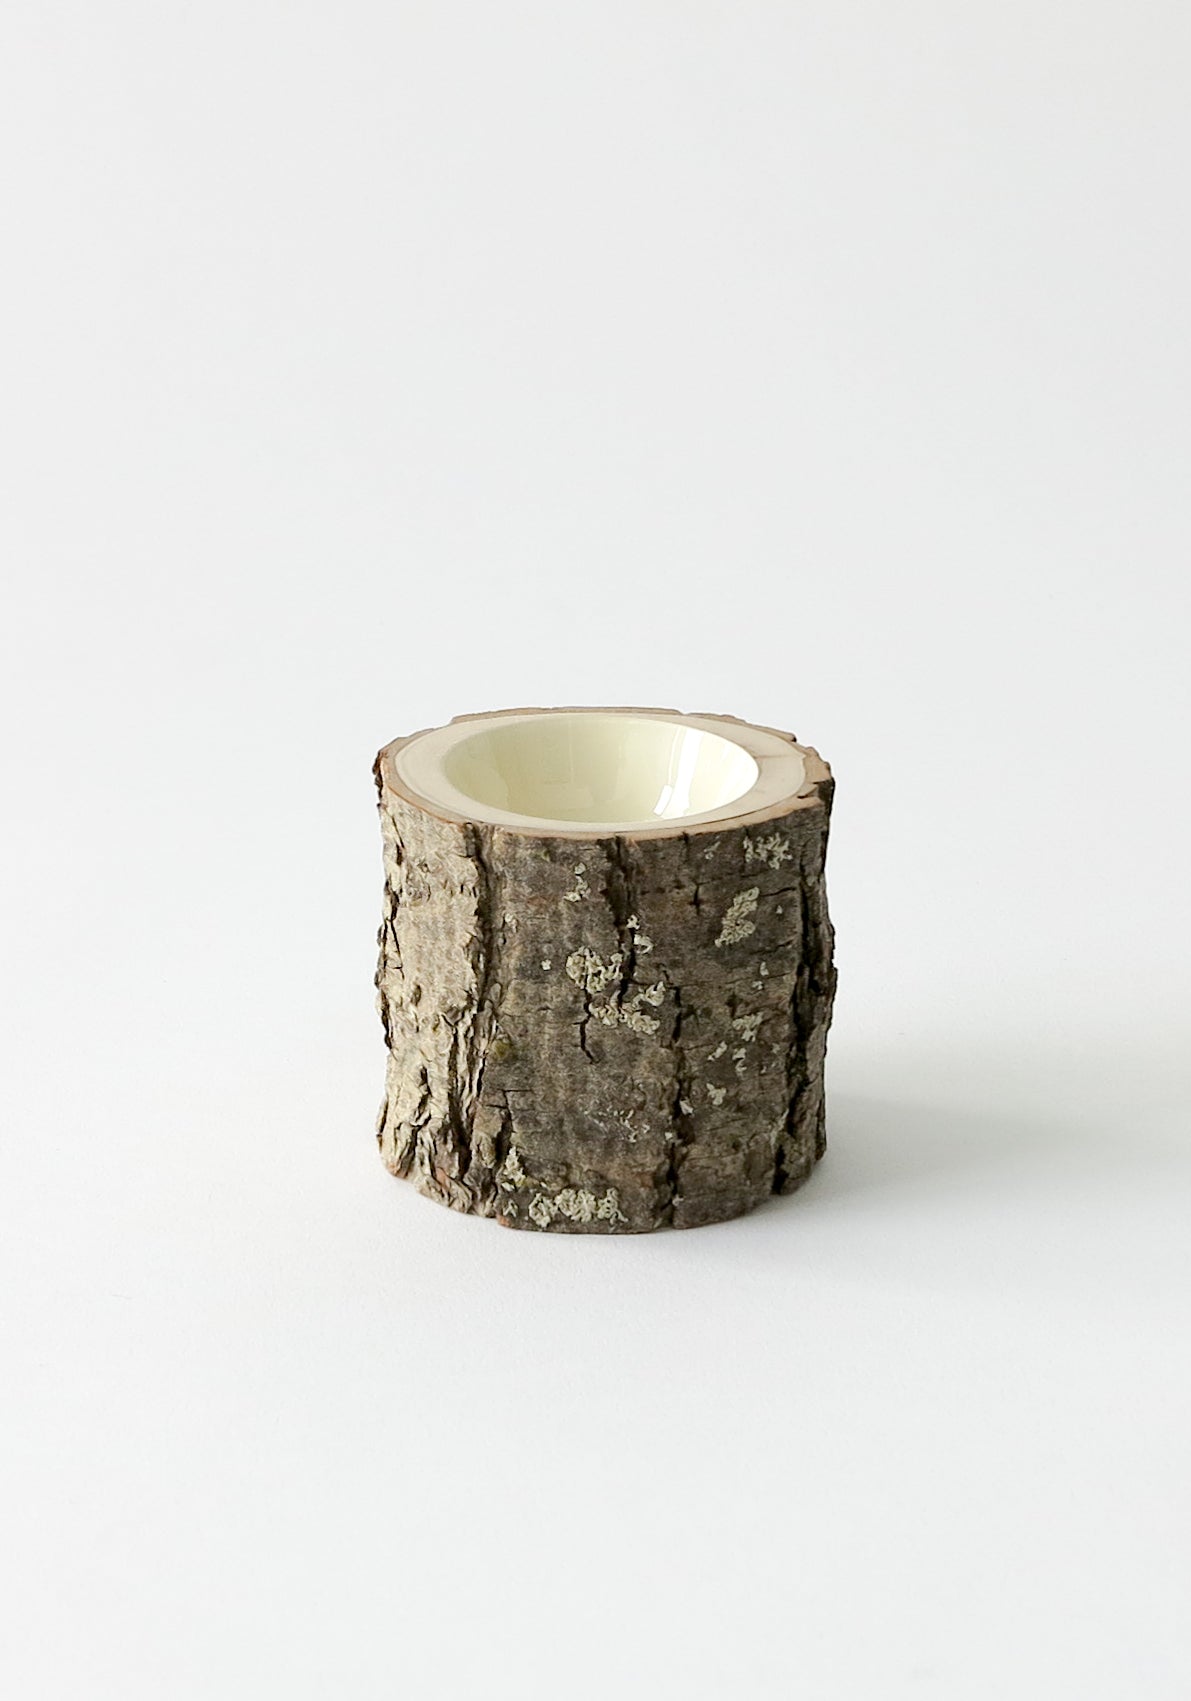 Extra Small wooden bowl with rough bark, glossy interior is s creamy white colour.